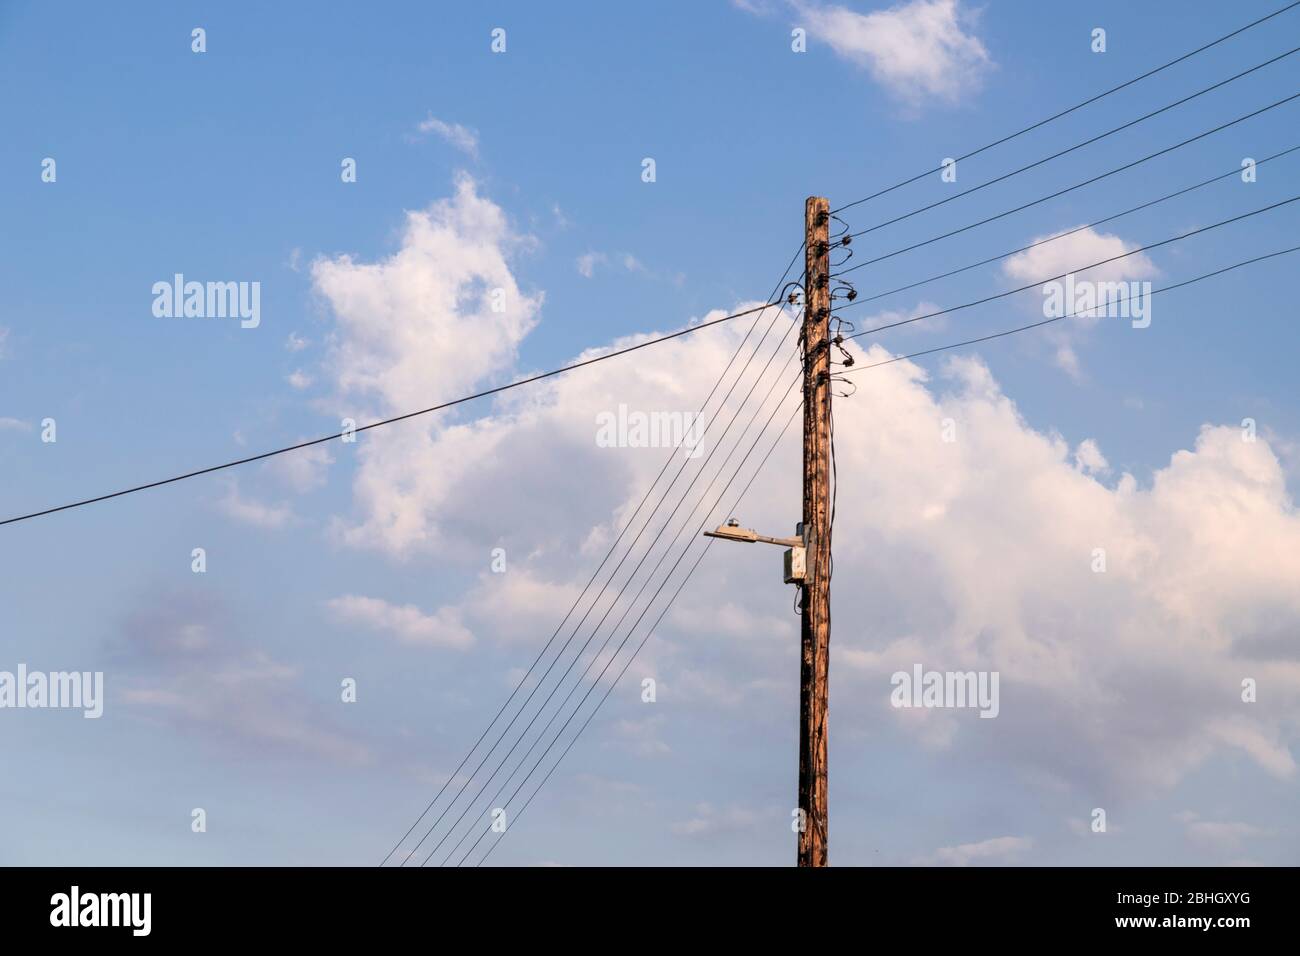 Wooden telegraph pole with power and telecoms cables attached Stock Photo